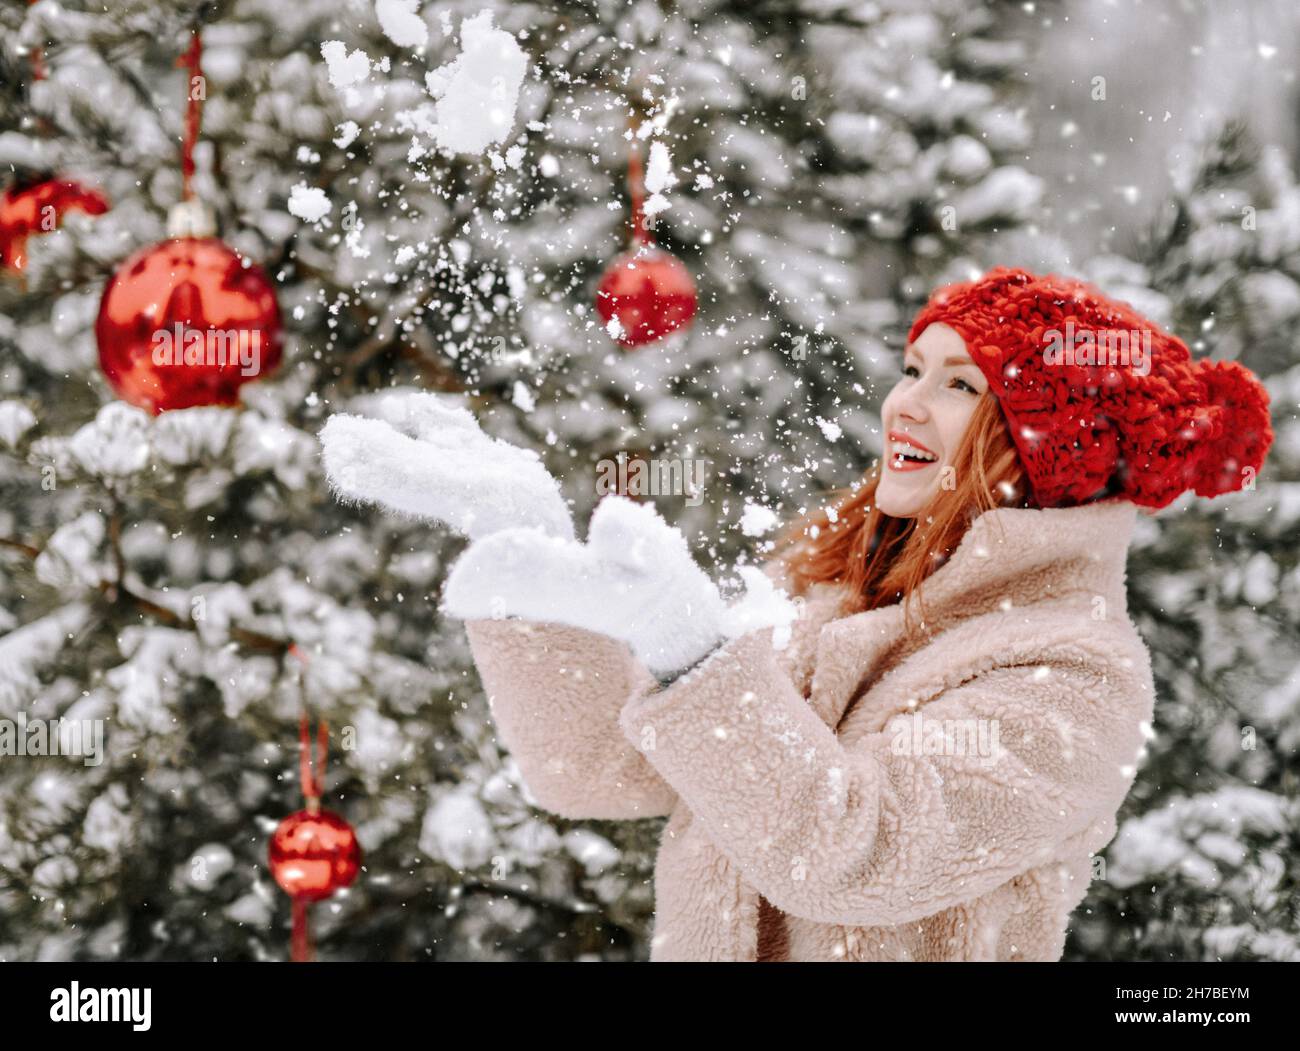 Young smiling beautiful woman in fur coat and mittens standing near decorated Christmas tree and catching snowflakes outdoors Stock Photo